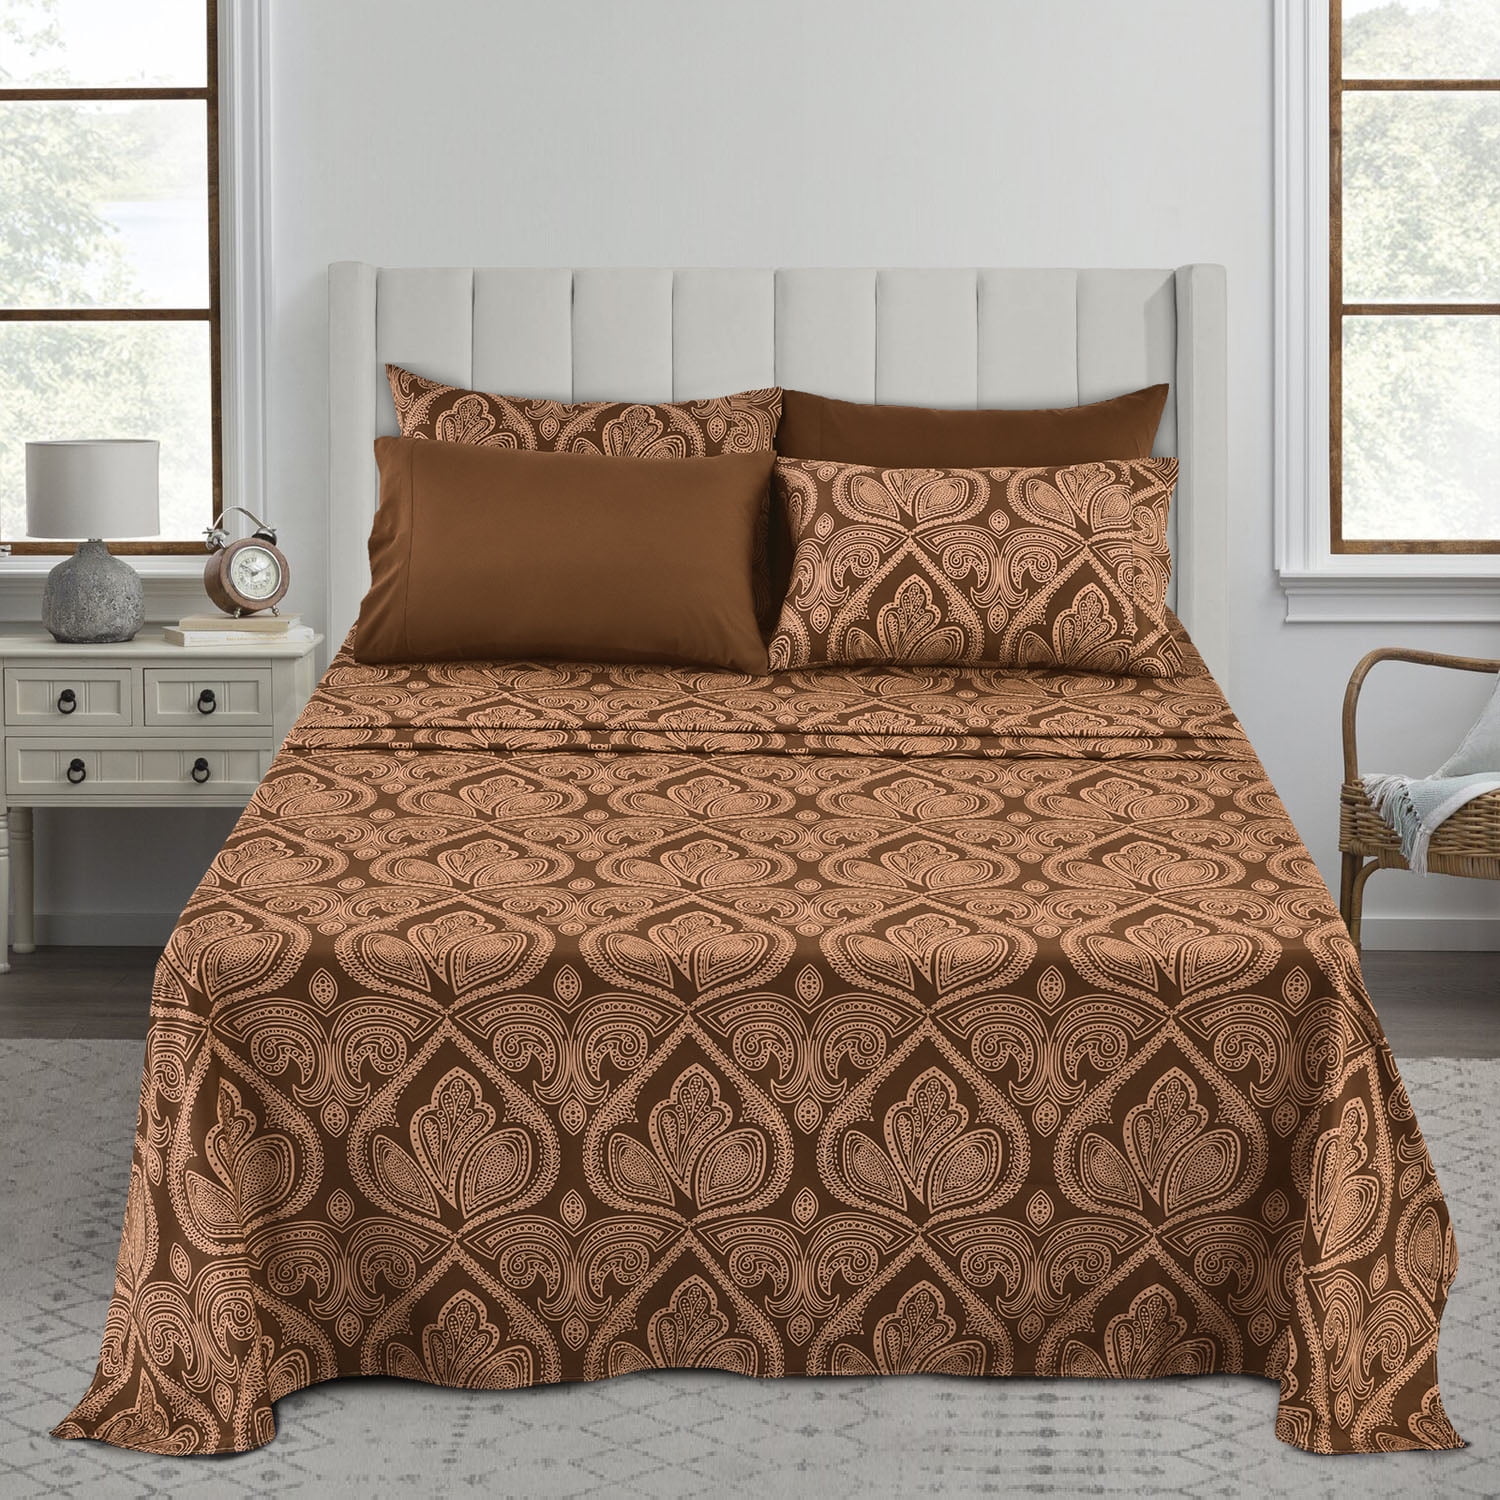 Details about   BEAUTIFUL ULTRA SOFT COZY LODGE LOG CABIN BUTTON TAN BROWN TAUPE COMFORTER SET 